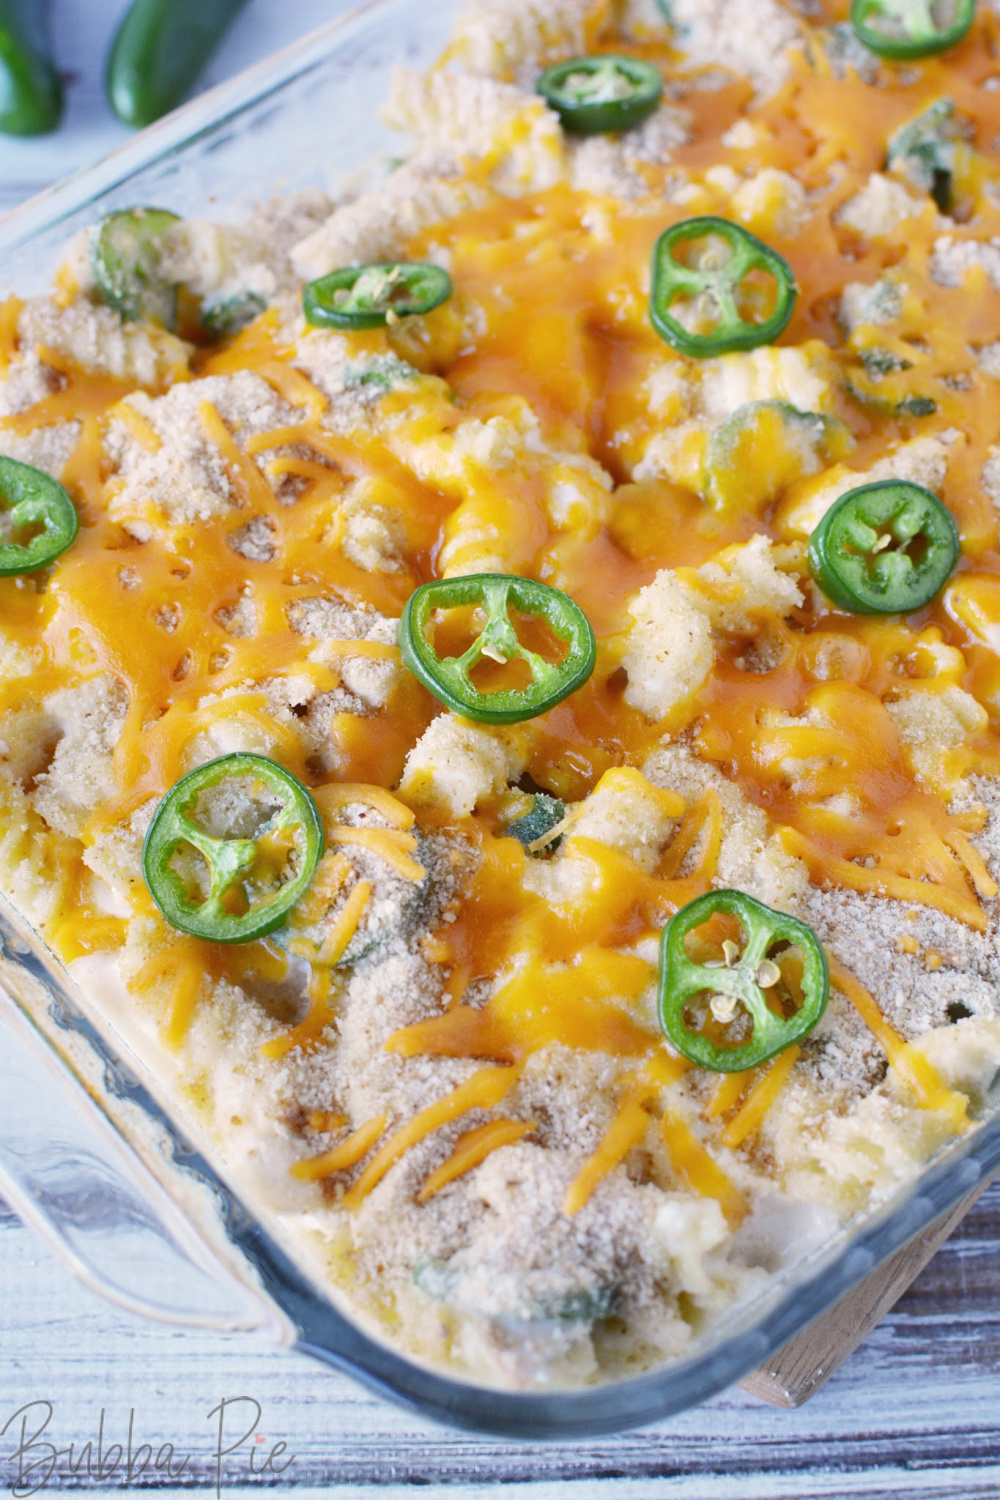 Jalapeno Popper Casserole after it is coming out of the oven